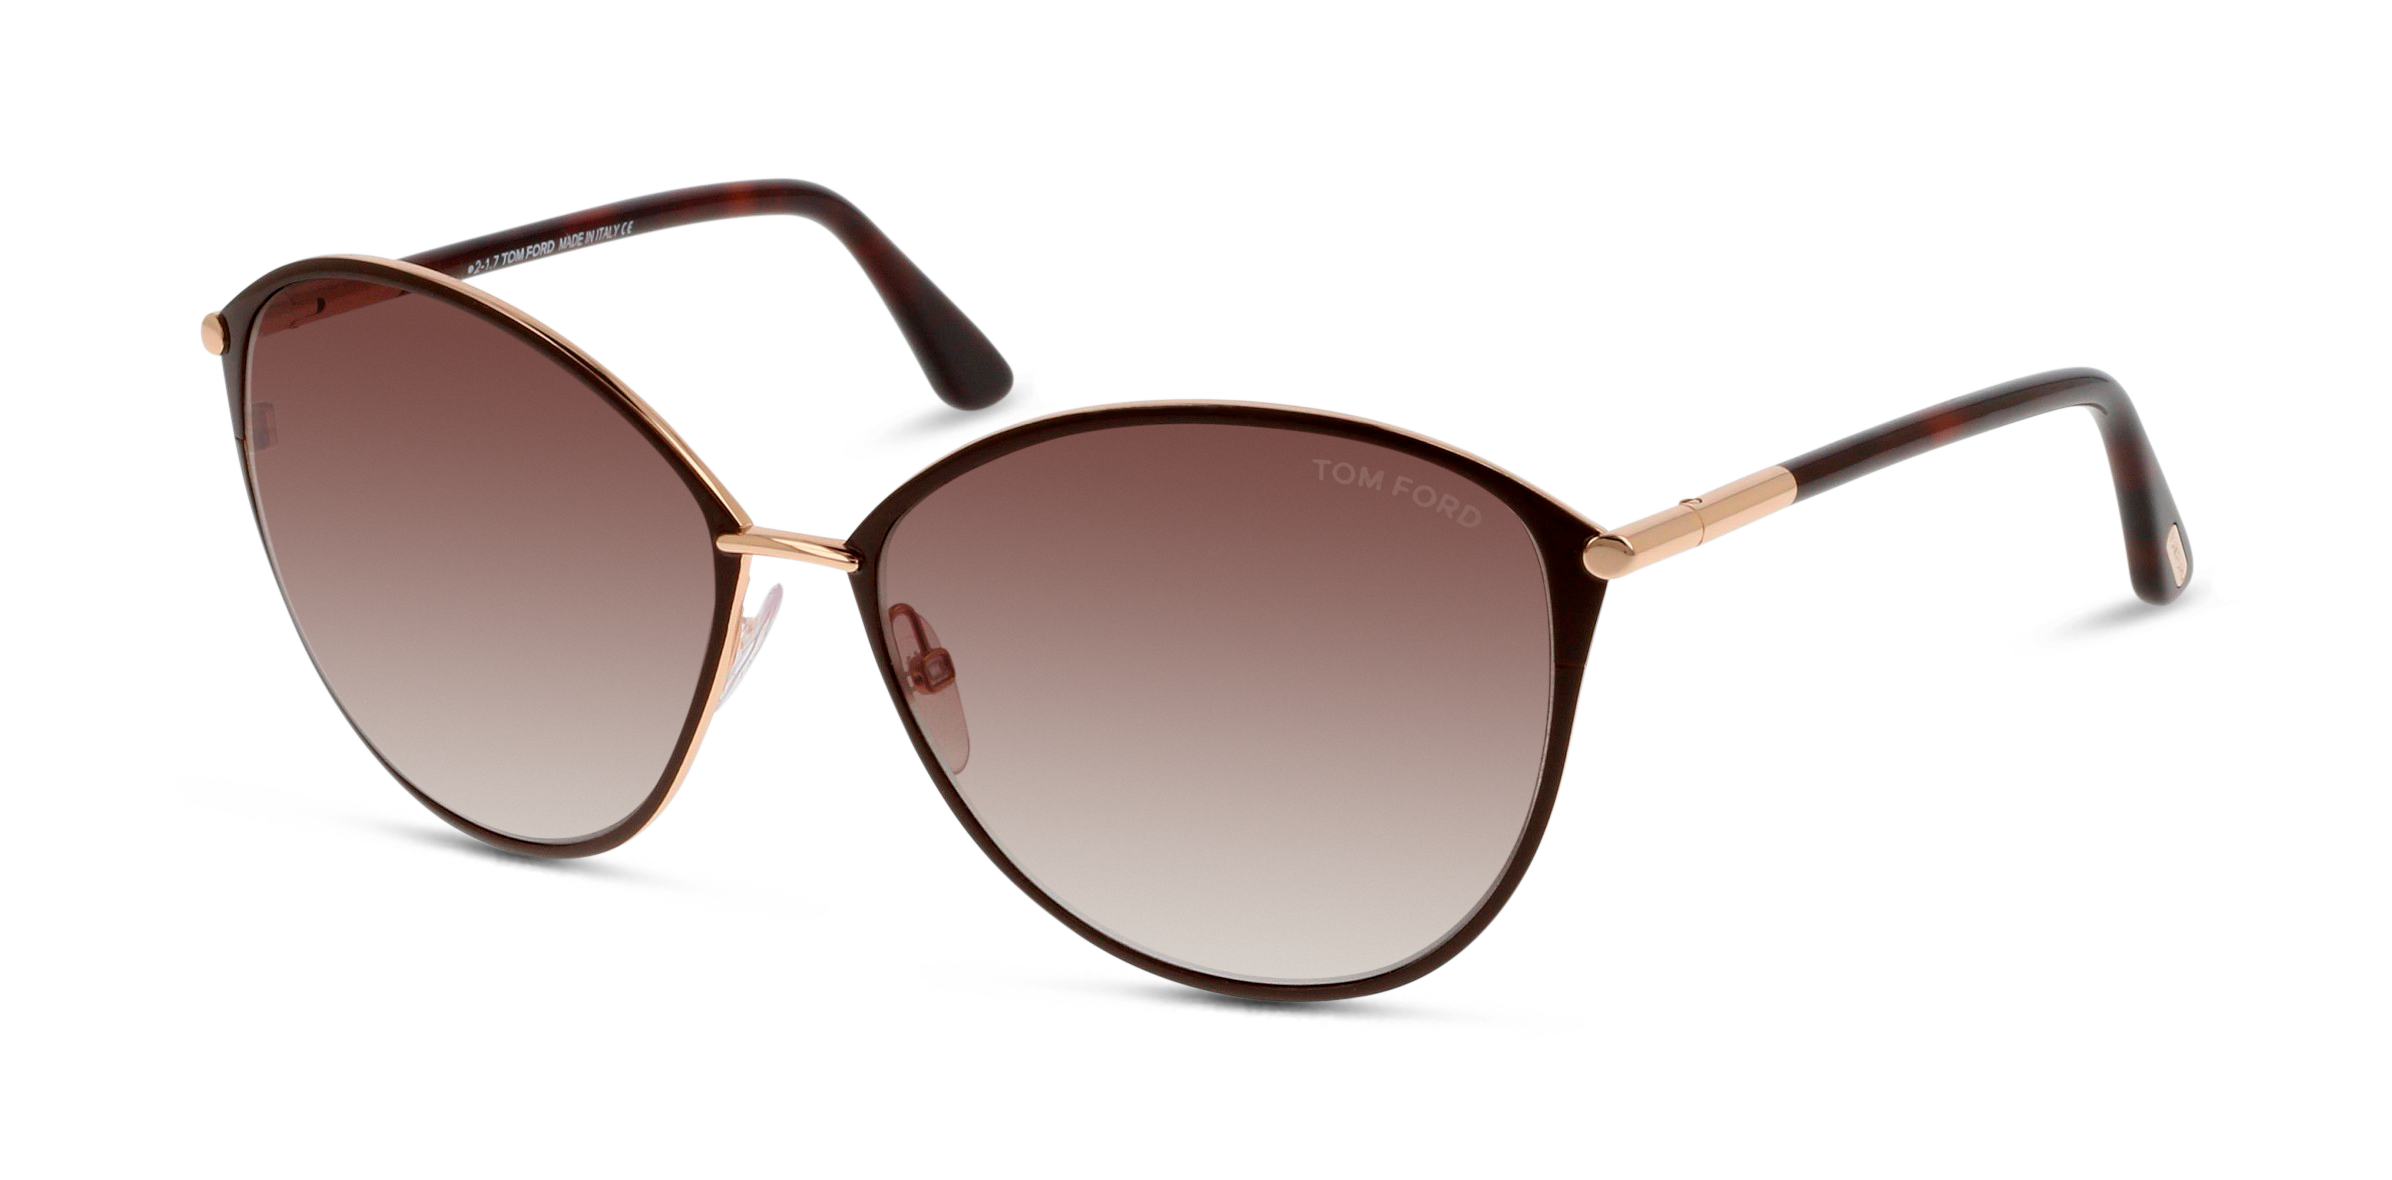 Angle_Left01 Tom Ford Penelope FT 320 Sunglasses Brown / Brown